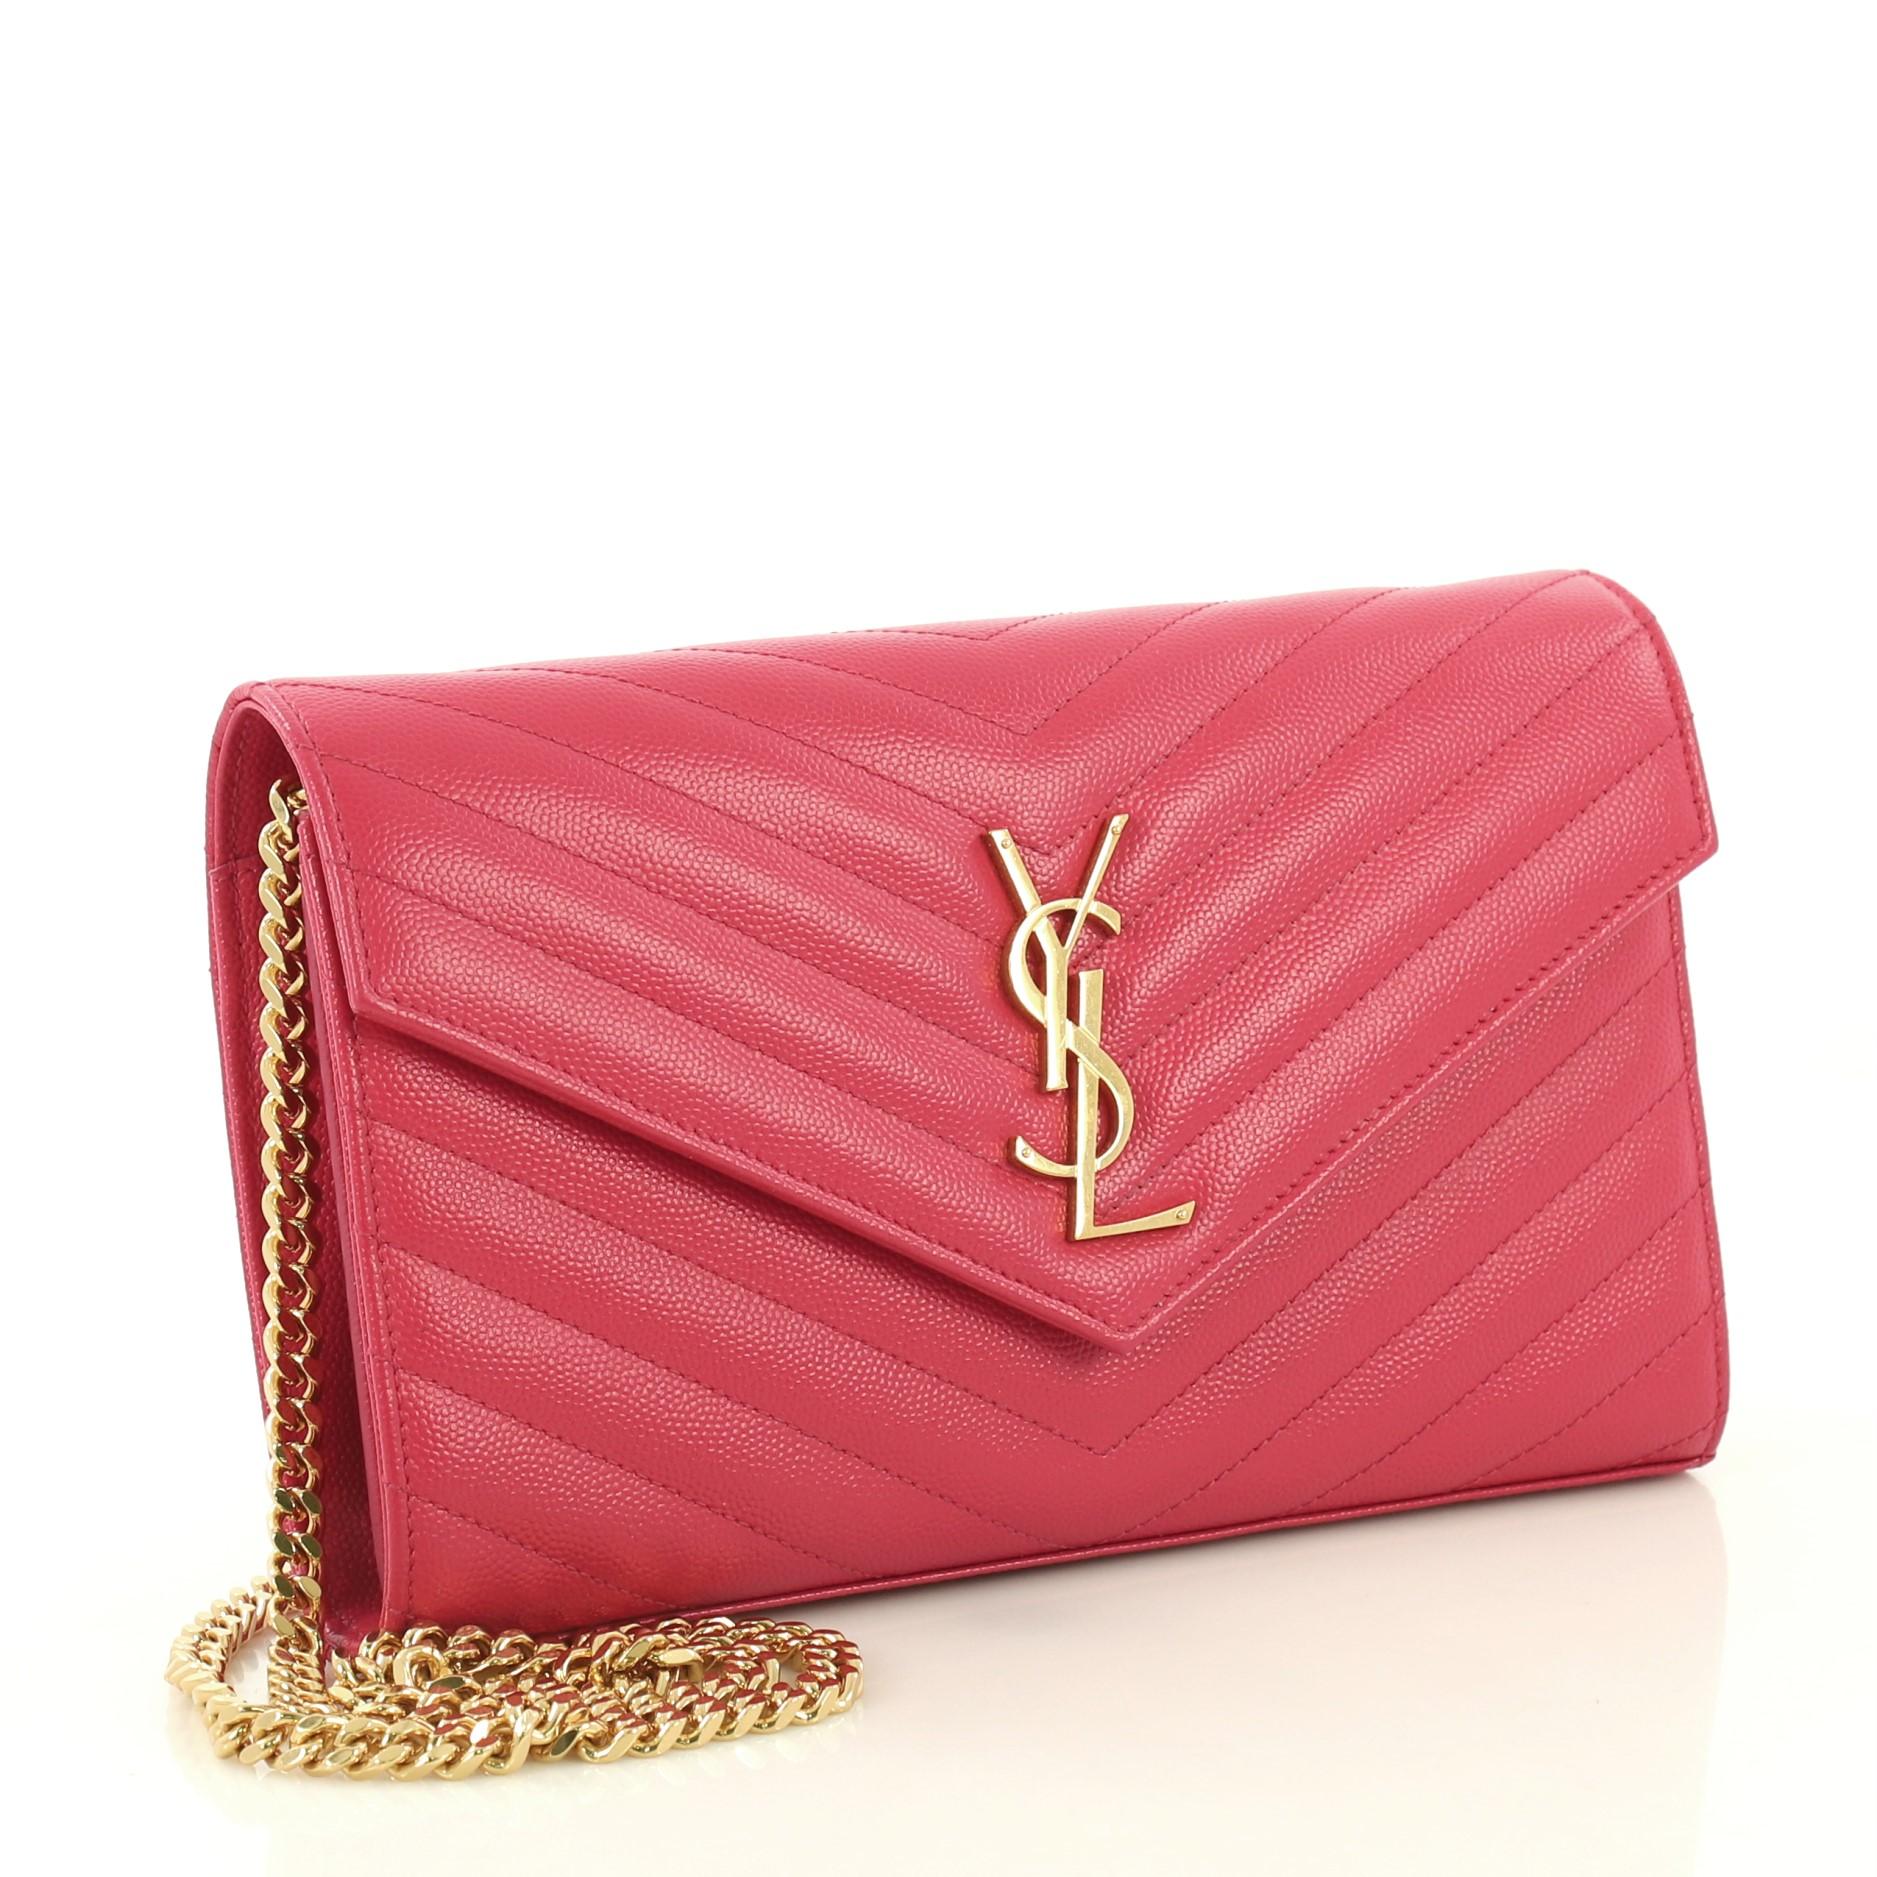 This Saint Laurent Classic Monogram Wallet on Chain Matelasse Chevron Leather Medium, crafted from pink matelasse chevron leather, features chain link strap, YSL monogram logo at the front, and gold-tone hardware. Its hidden magnetic snap closure